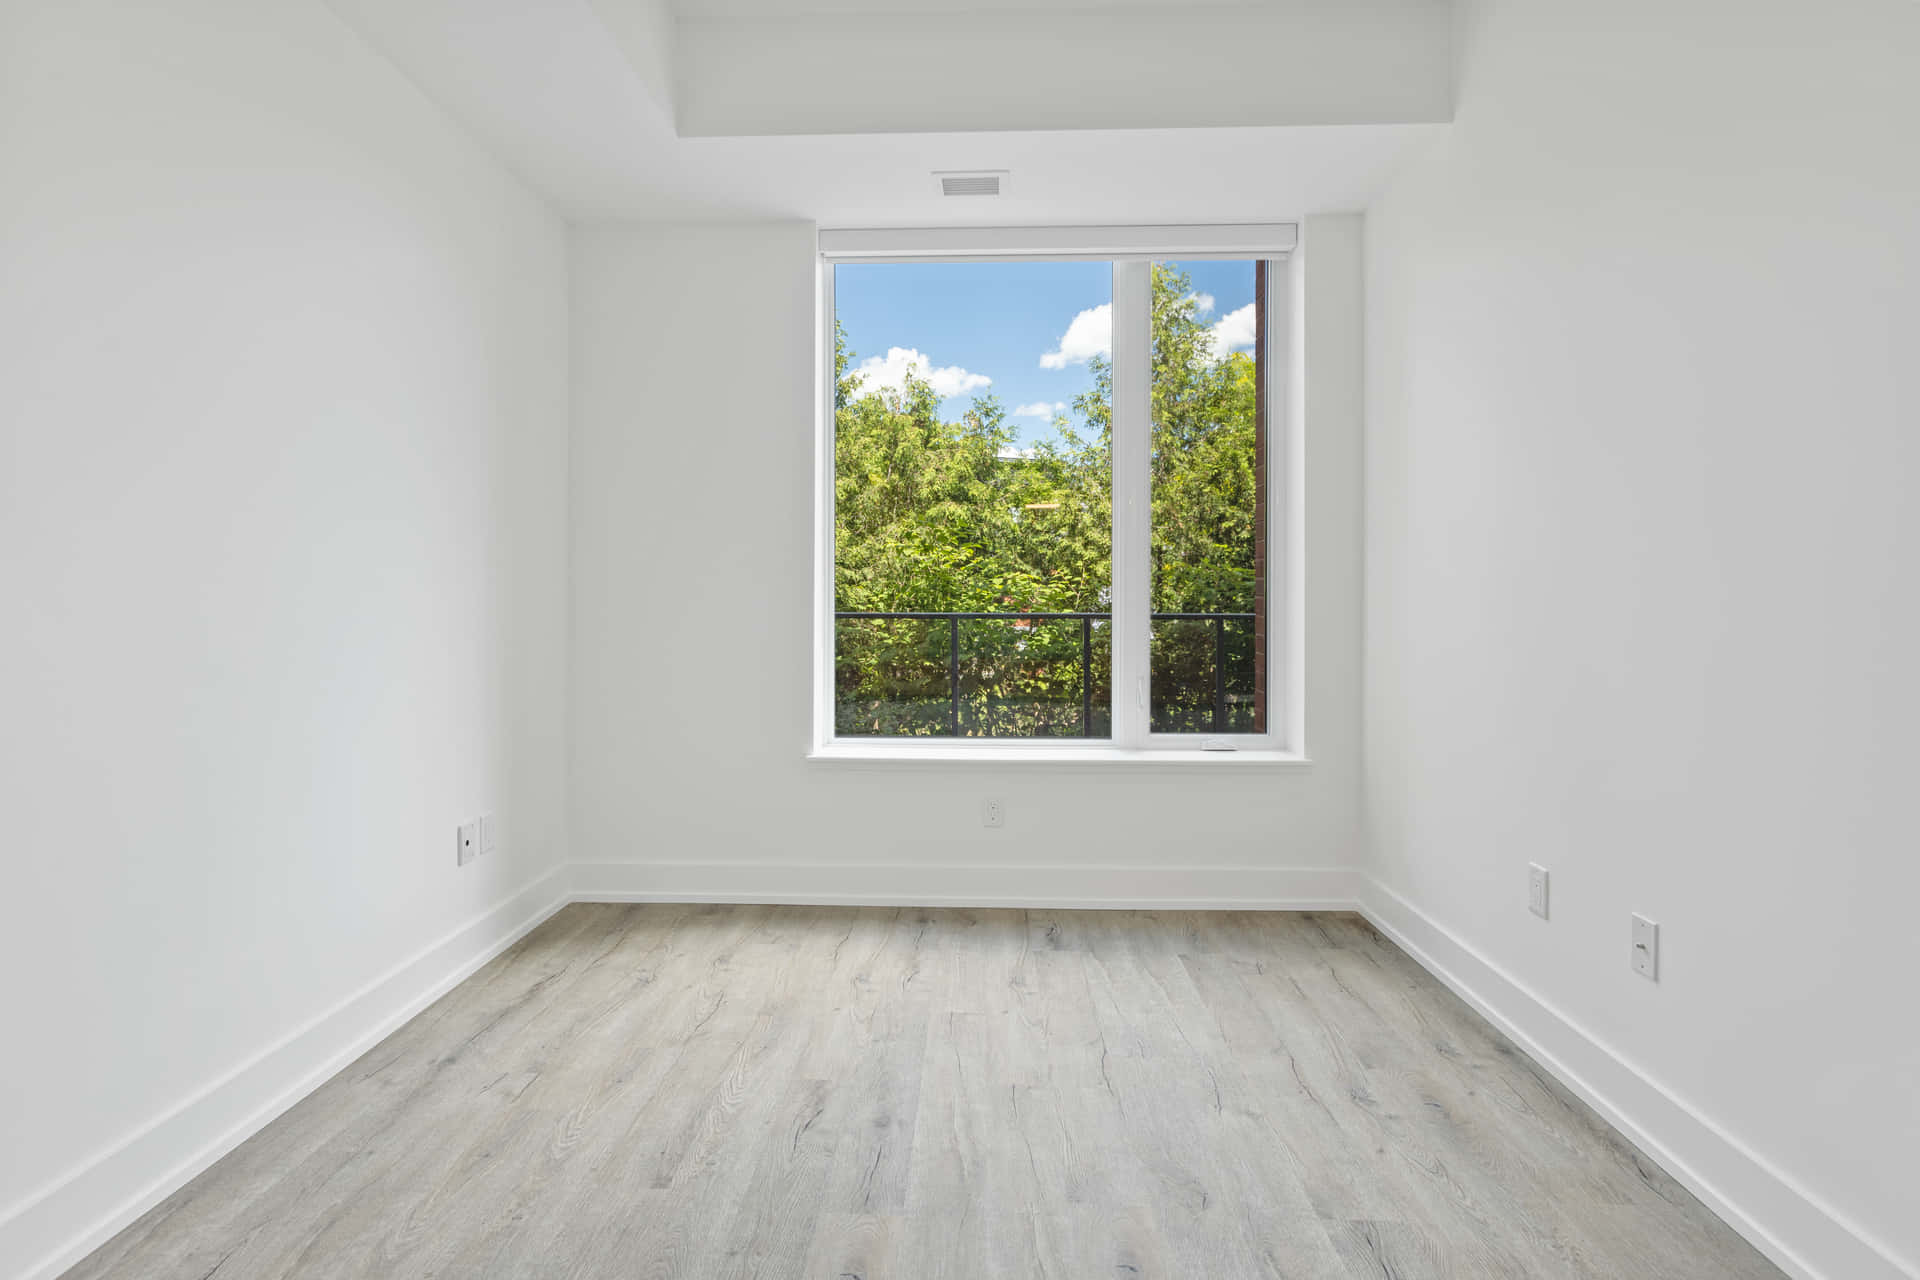 Caption: Simplistic Empty Room with Electrical Outlets Wallpaper